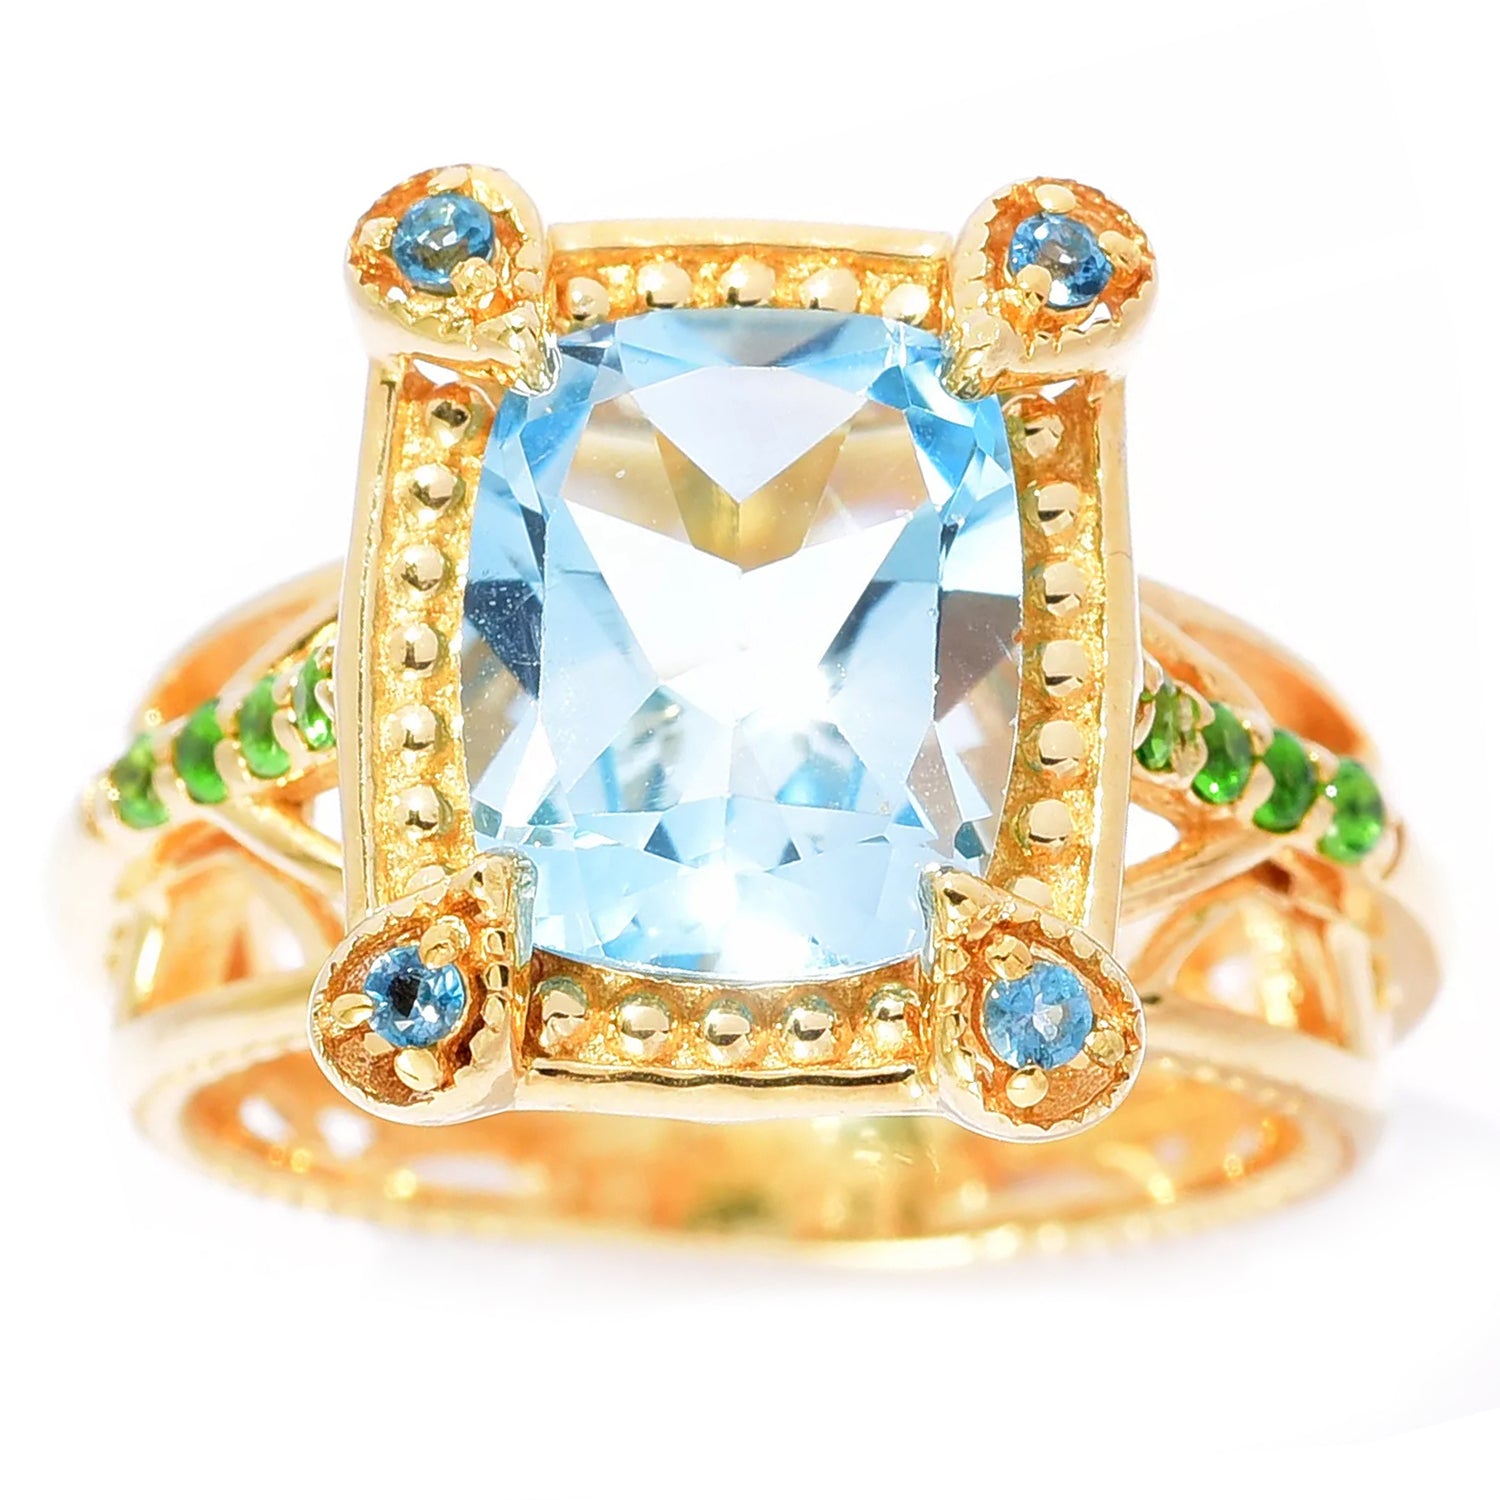 Hall of Jewels 4.76ctw Sky Blue Topaz & Chrome Diopside Ring